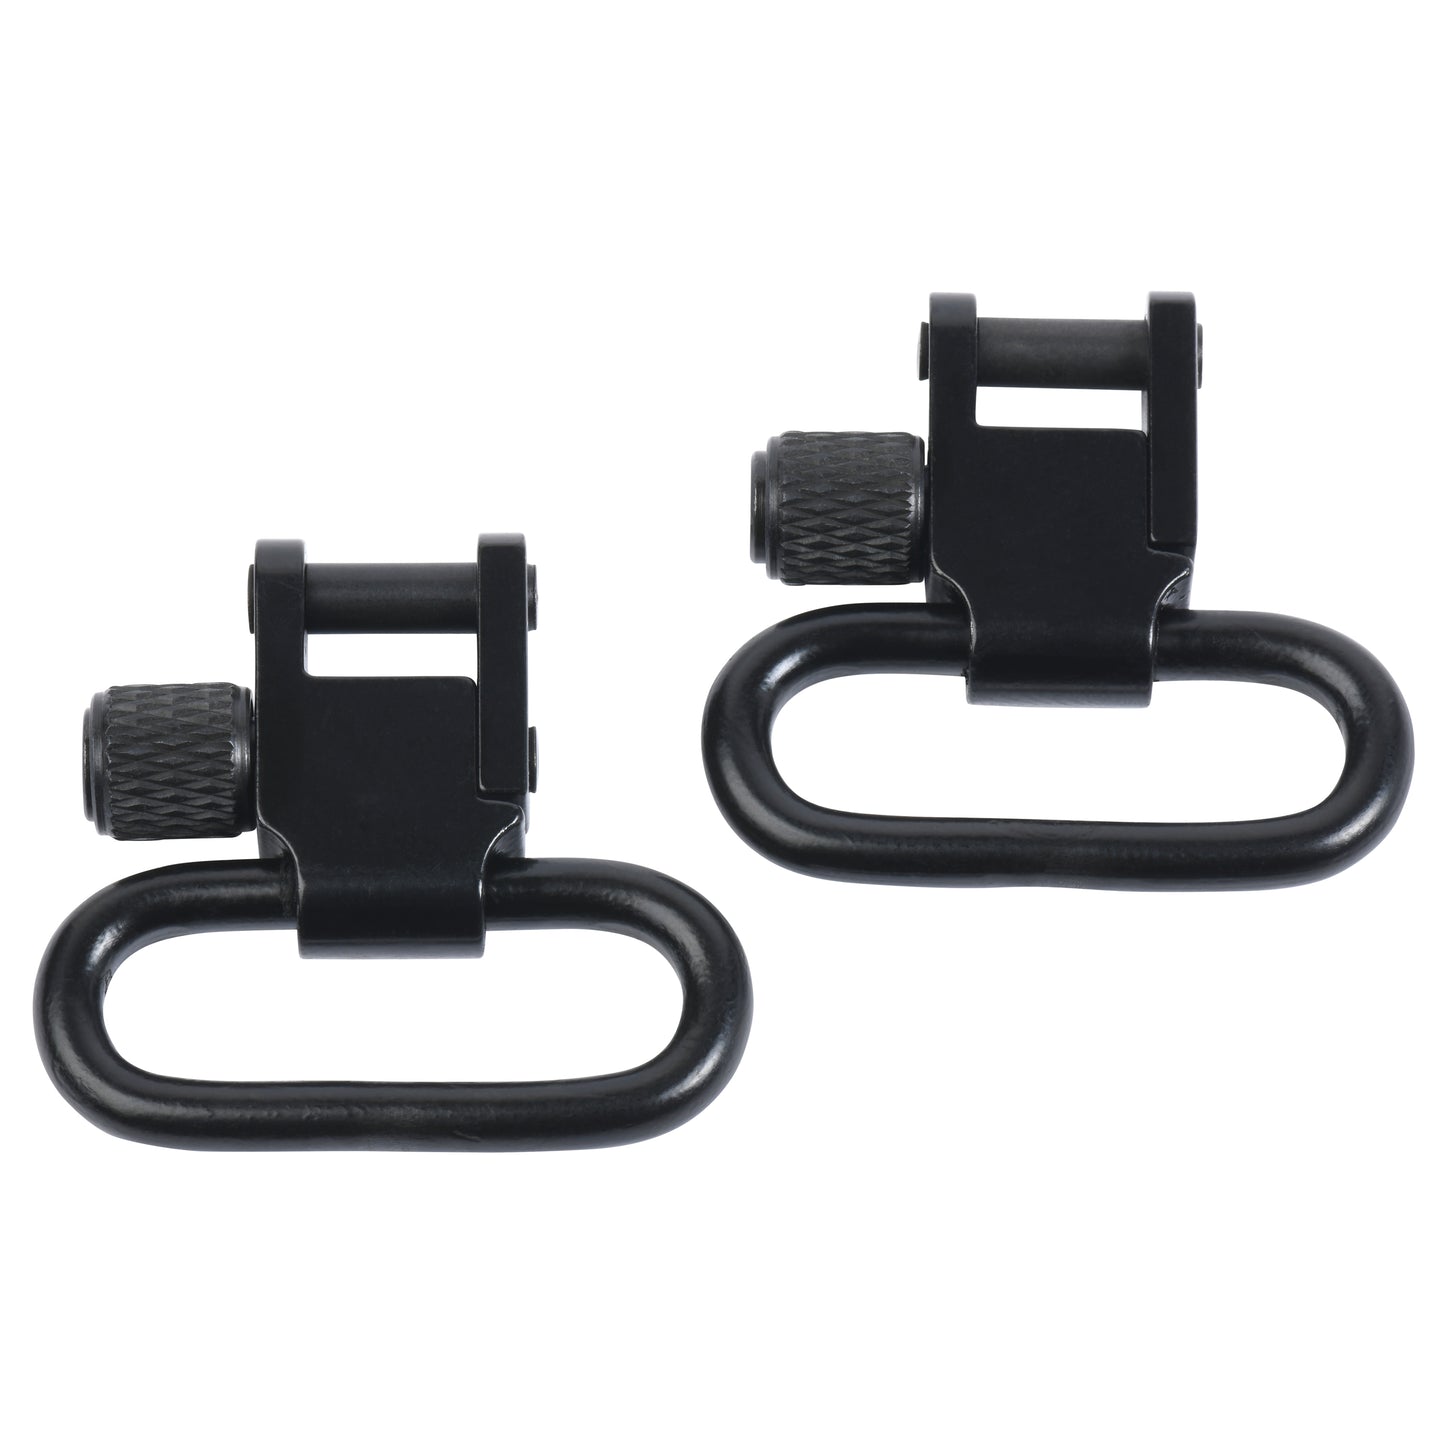 Black Gun Sling Swivels Available in 1 Inch or 1.25 Inch Widths (Price includes shipping)